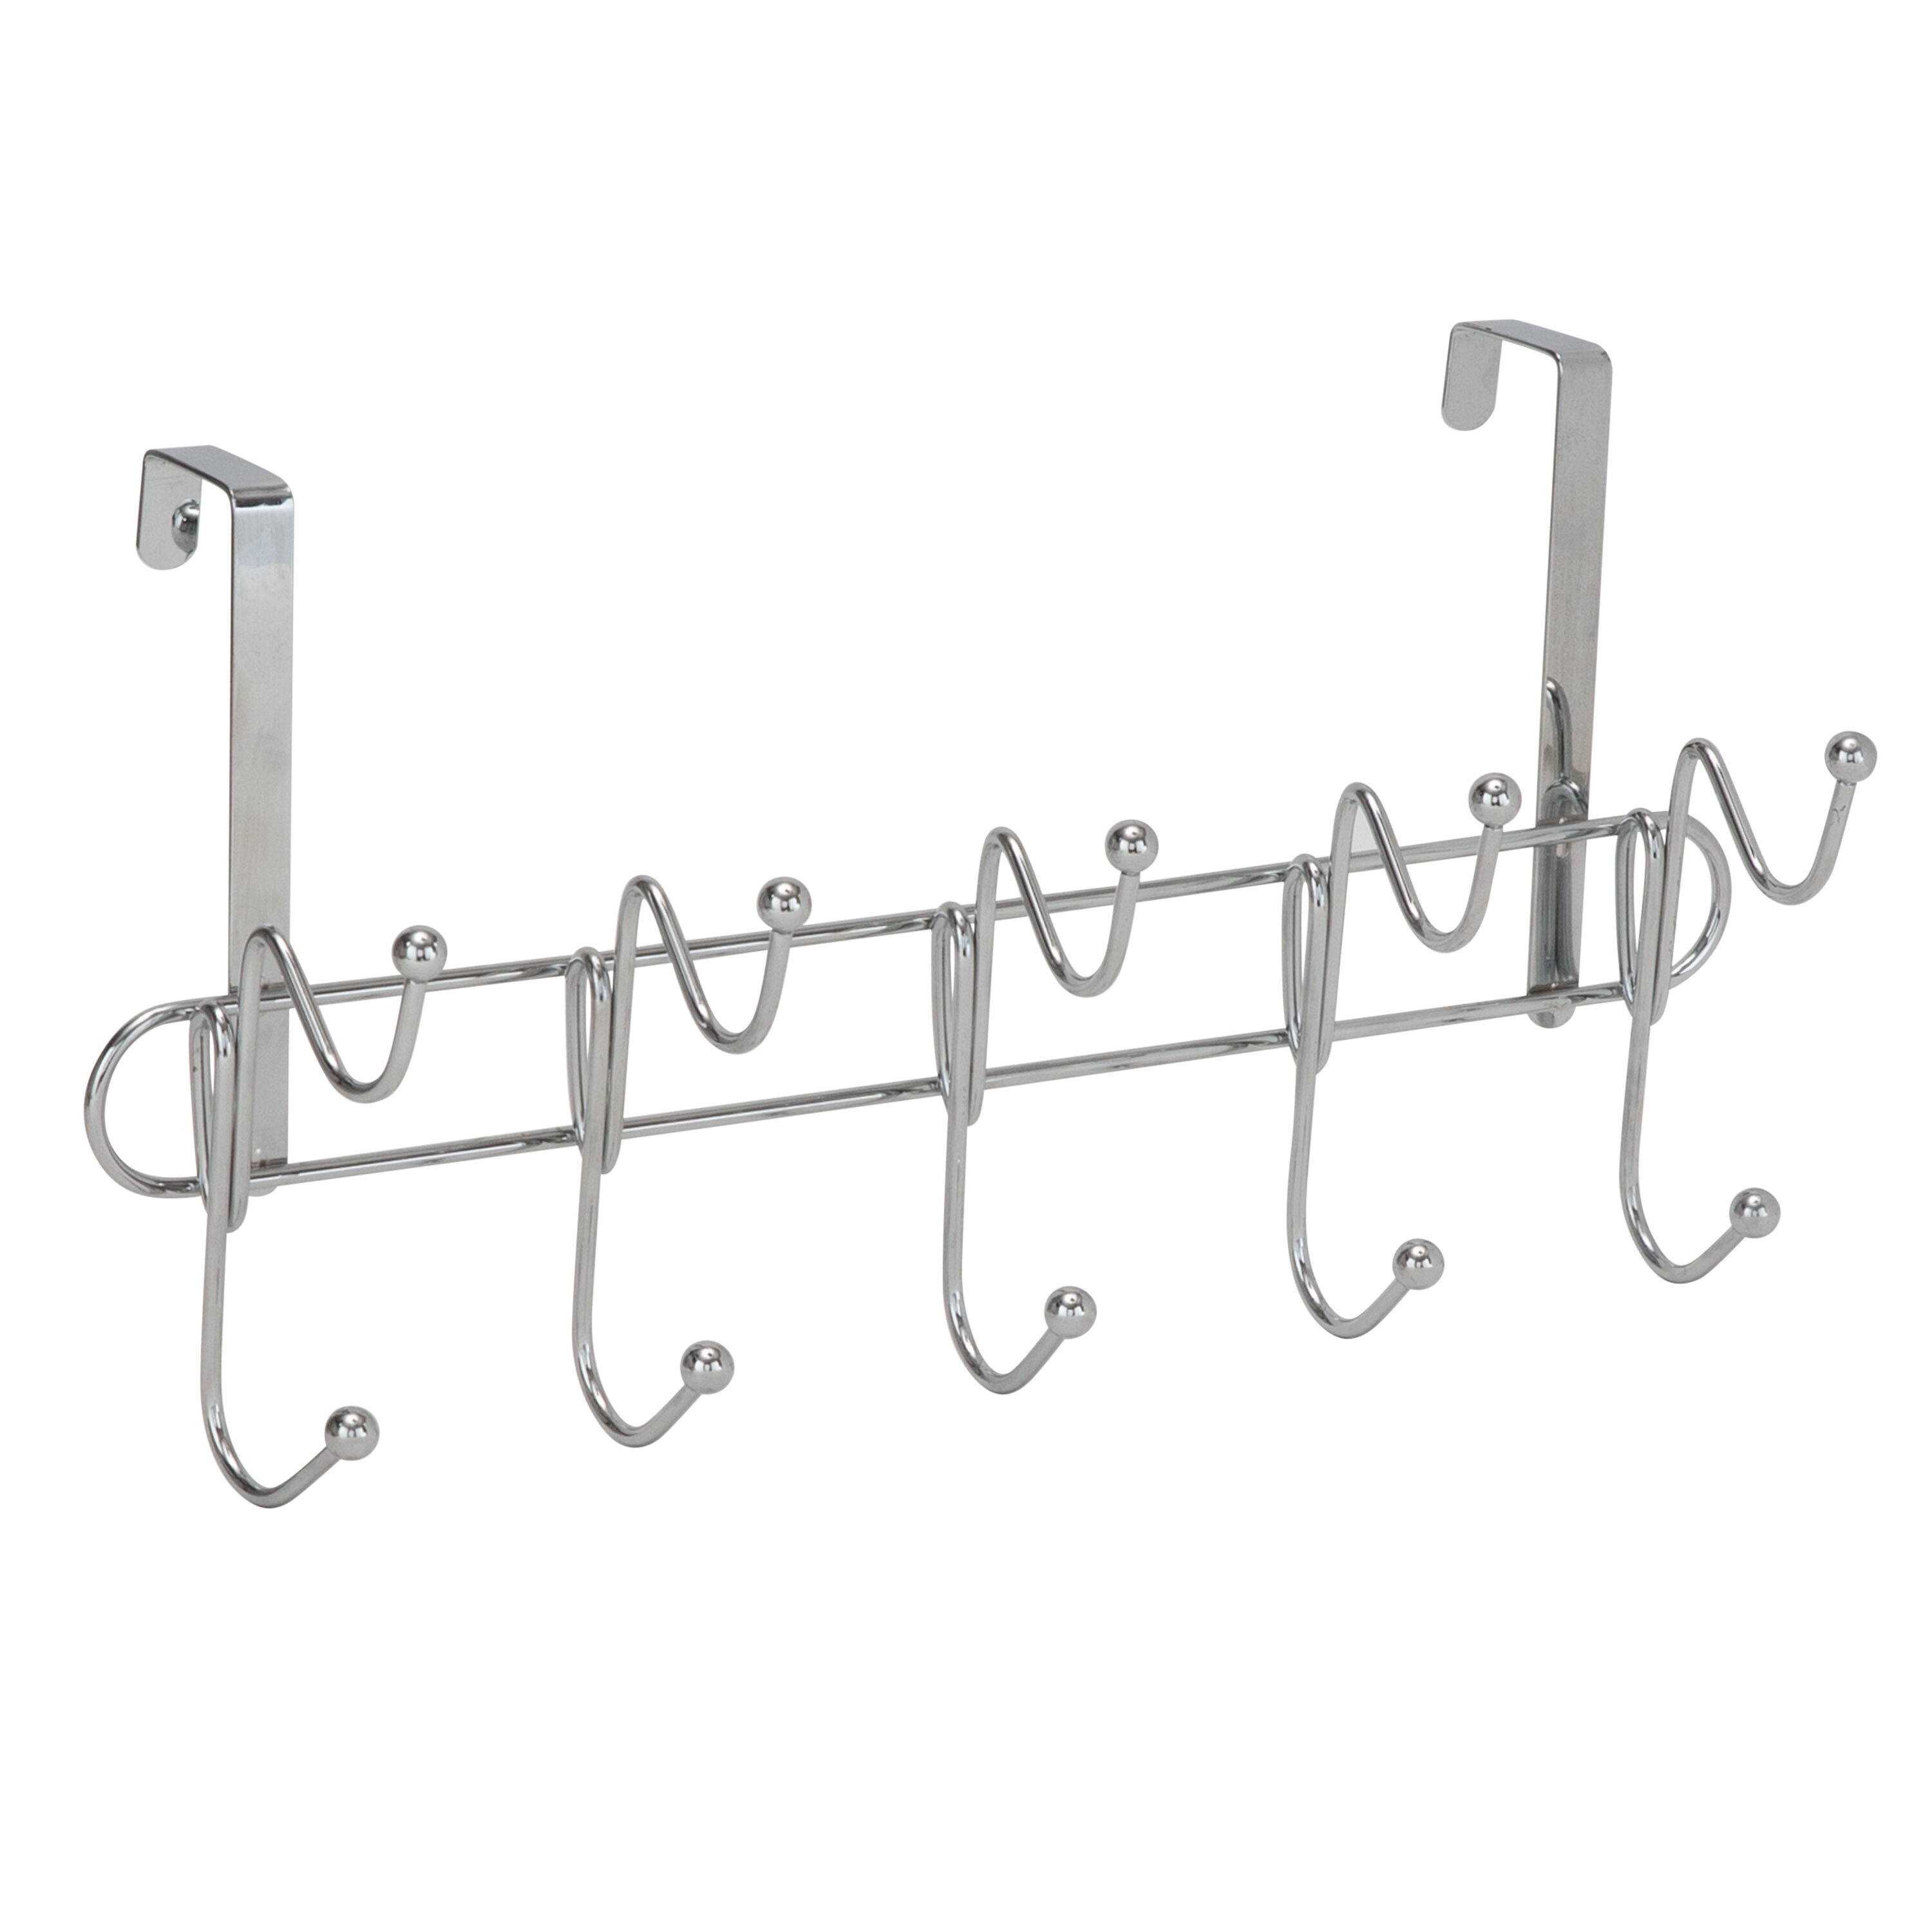 Over-the-door Utility Hooks & Racks at Lowes.com